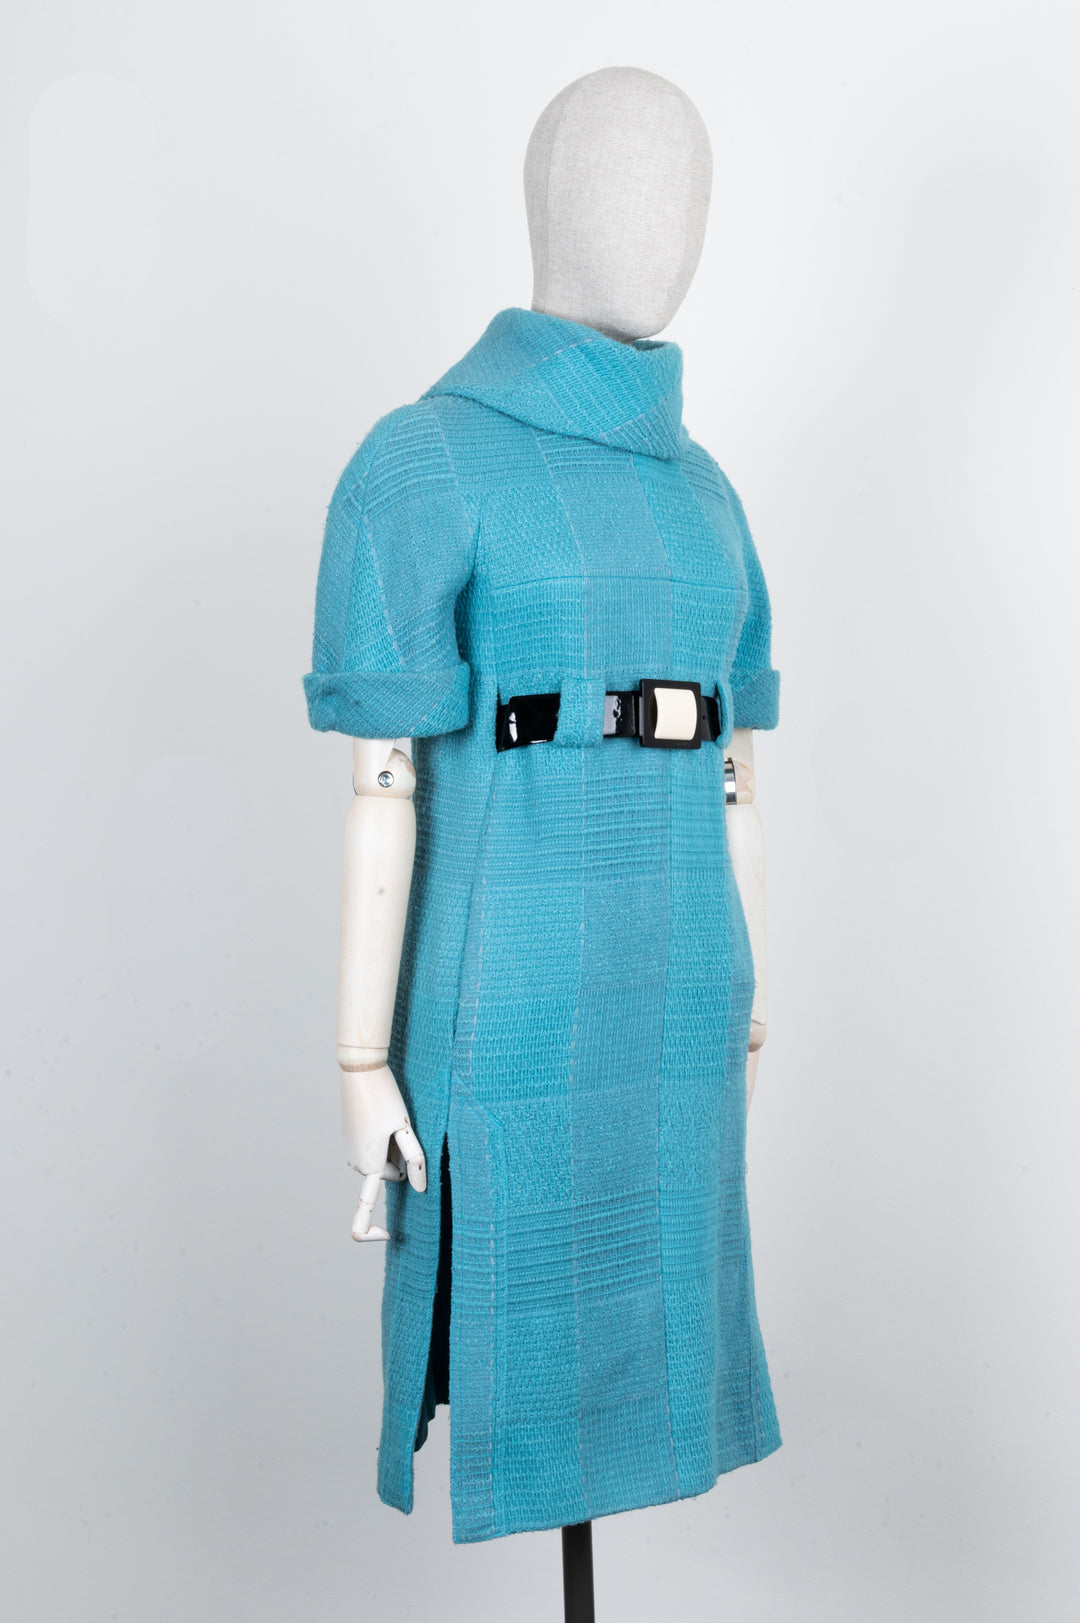 CHANEL Dress with Belt Tweed Bright Blue 07 Autumn